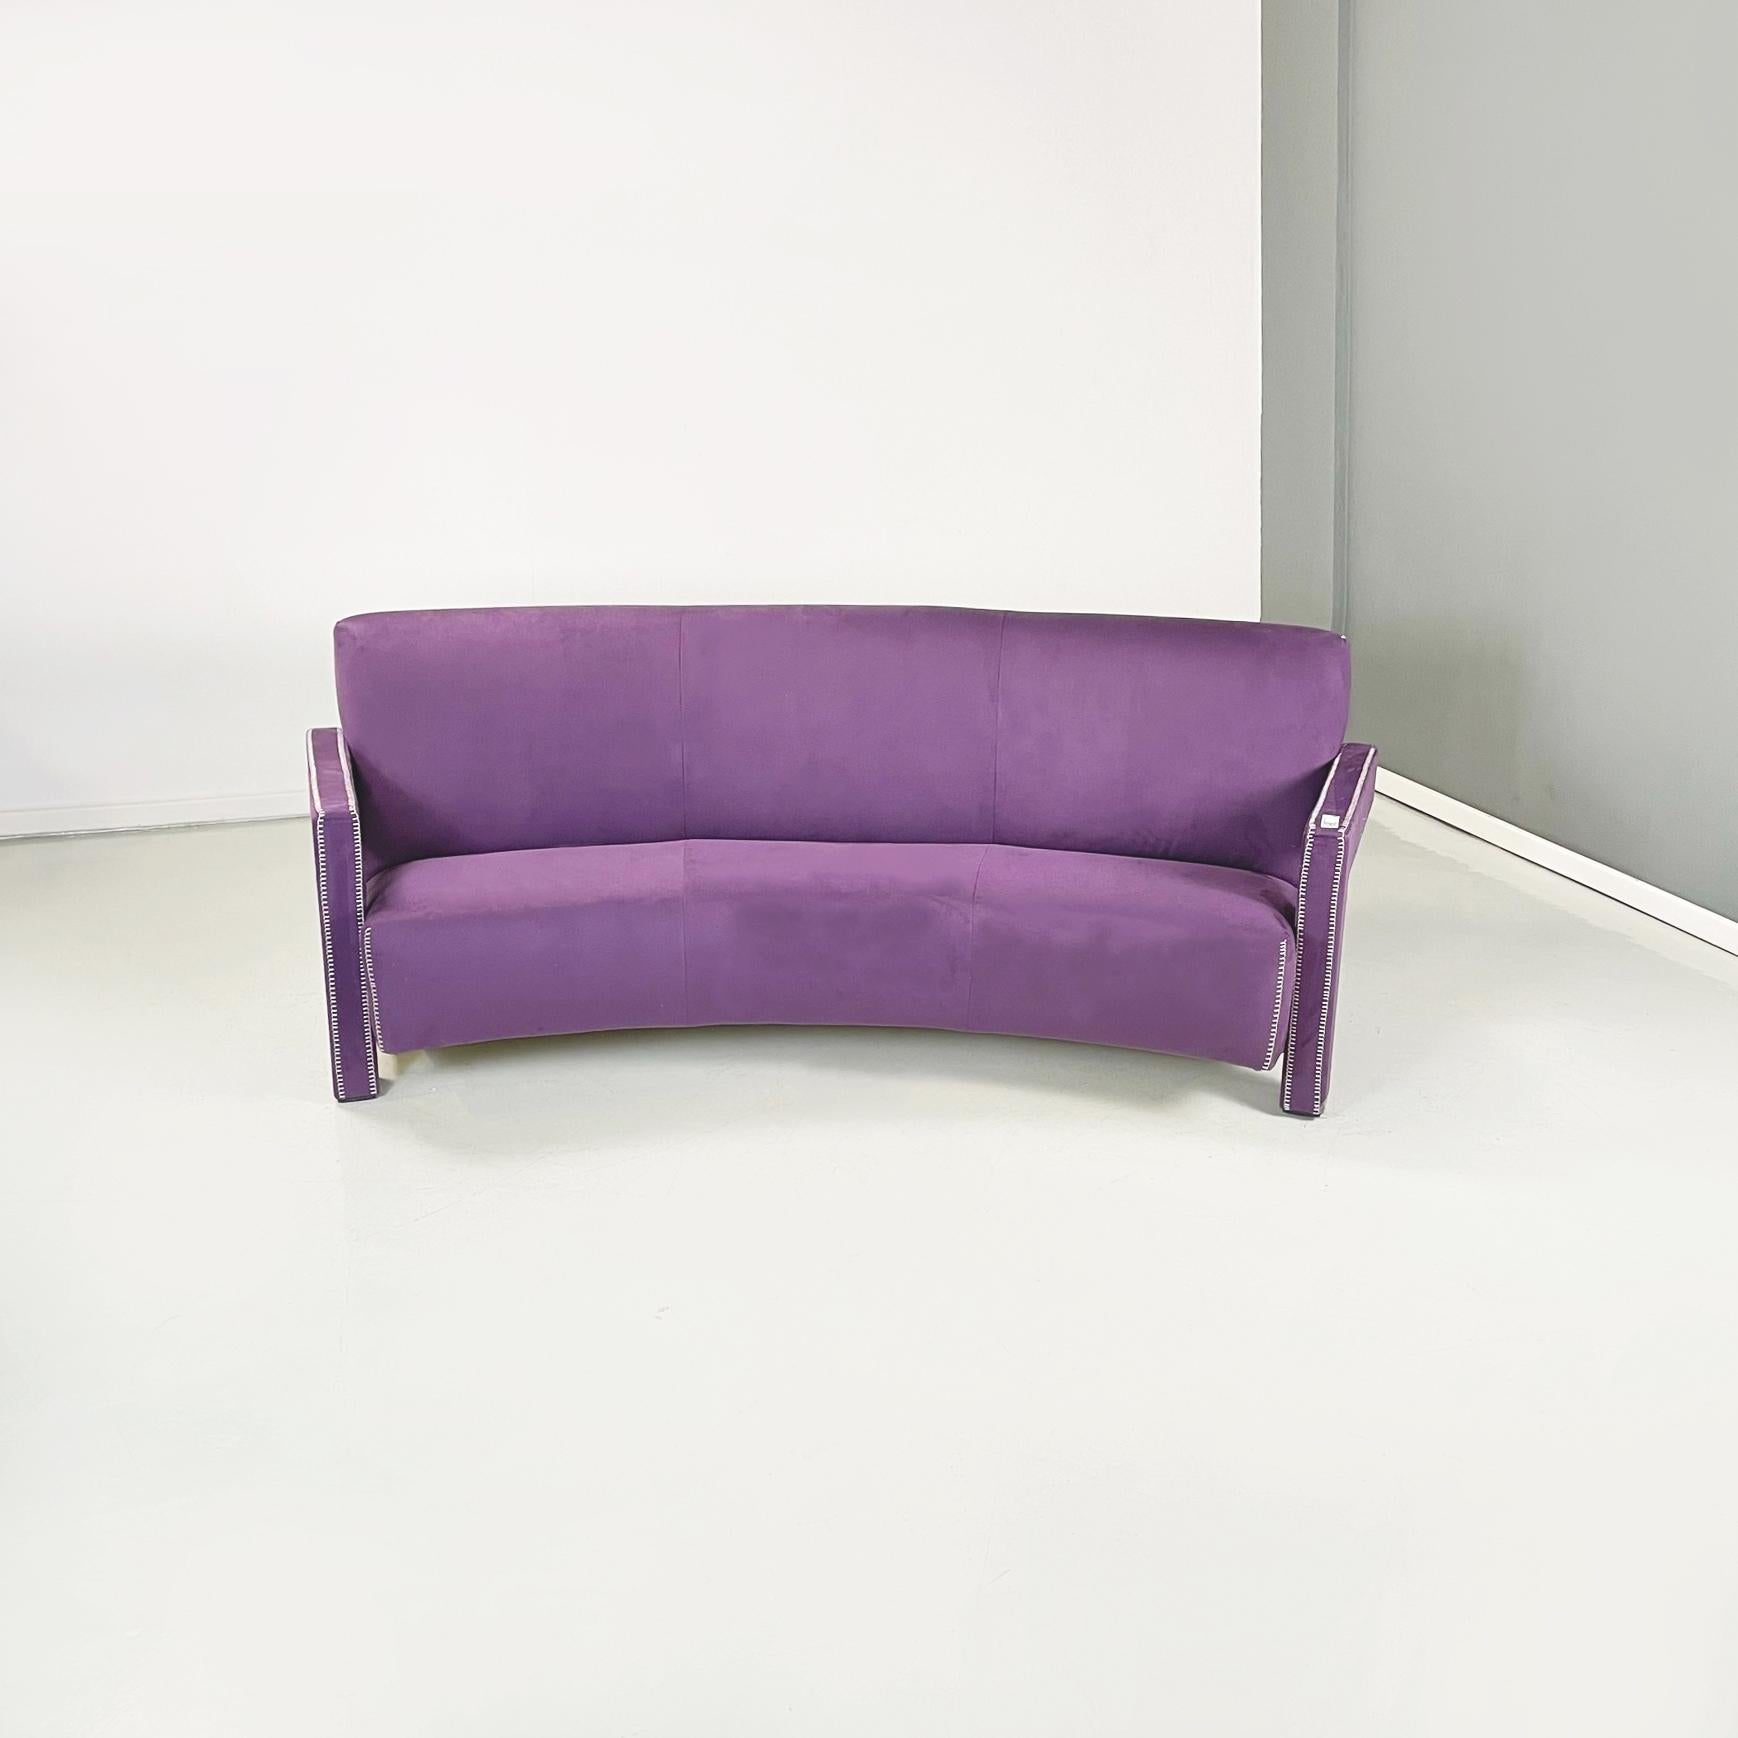 Italian modern Velvet sofa mod. Utrecht by Gerrit Thomas Rietveld for Cassina , 1990s
fantastic three-seater sofa mod. Utrecht with curved seat and backrest, padded and upholstered in purple velvet with visible white stitching. The squared armrests